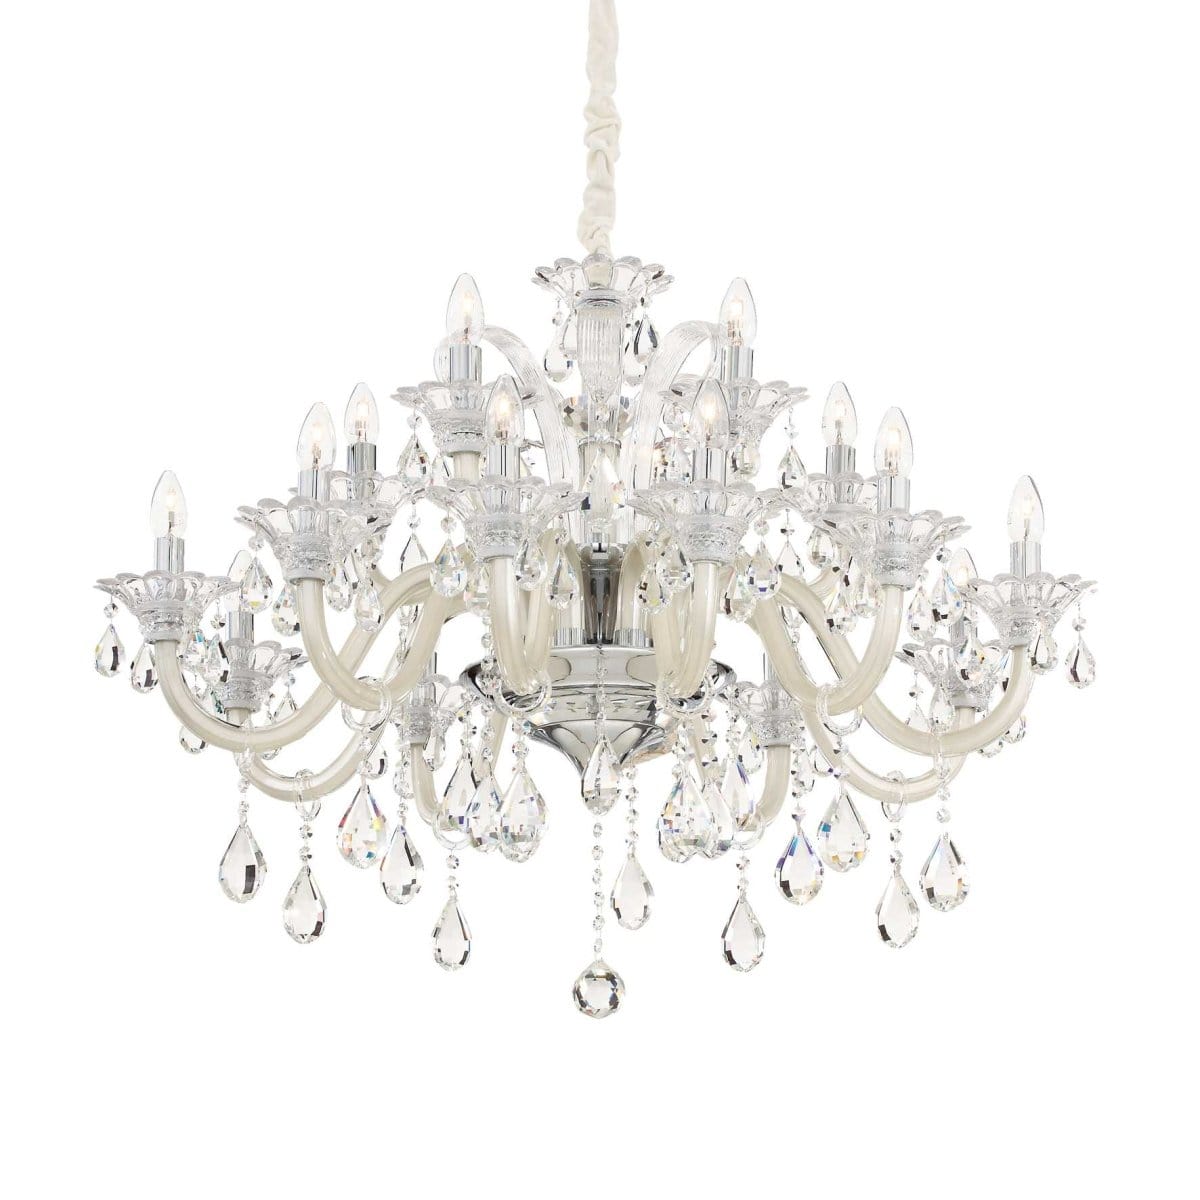 Ideal Lux Lighting Chandeliers Ivory Colossal Crystal Chandelier